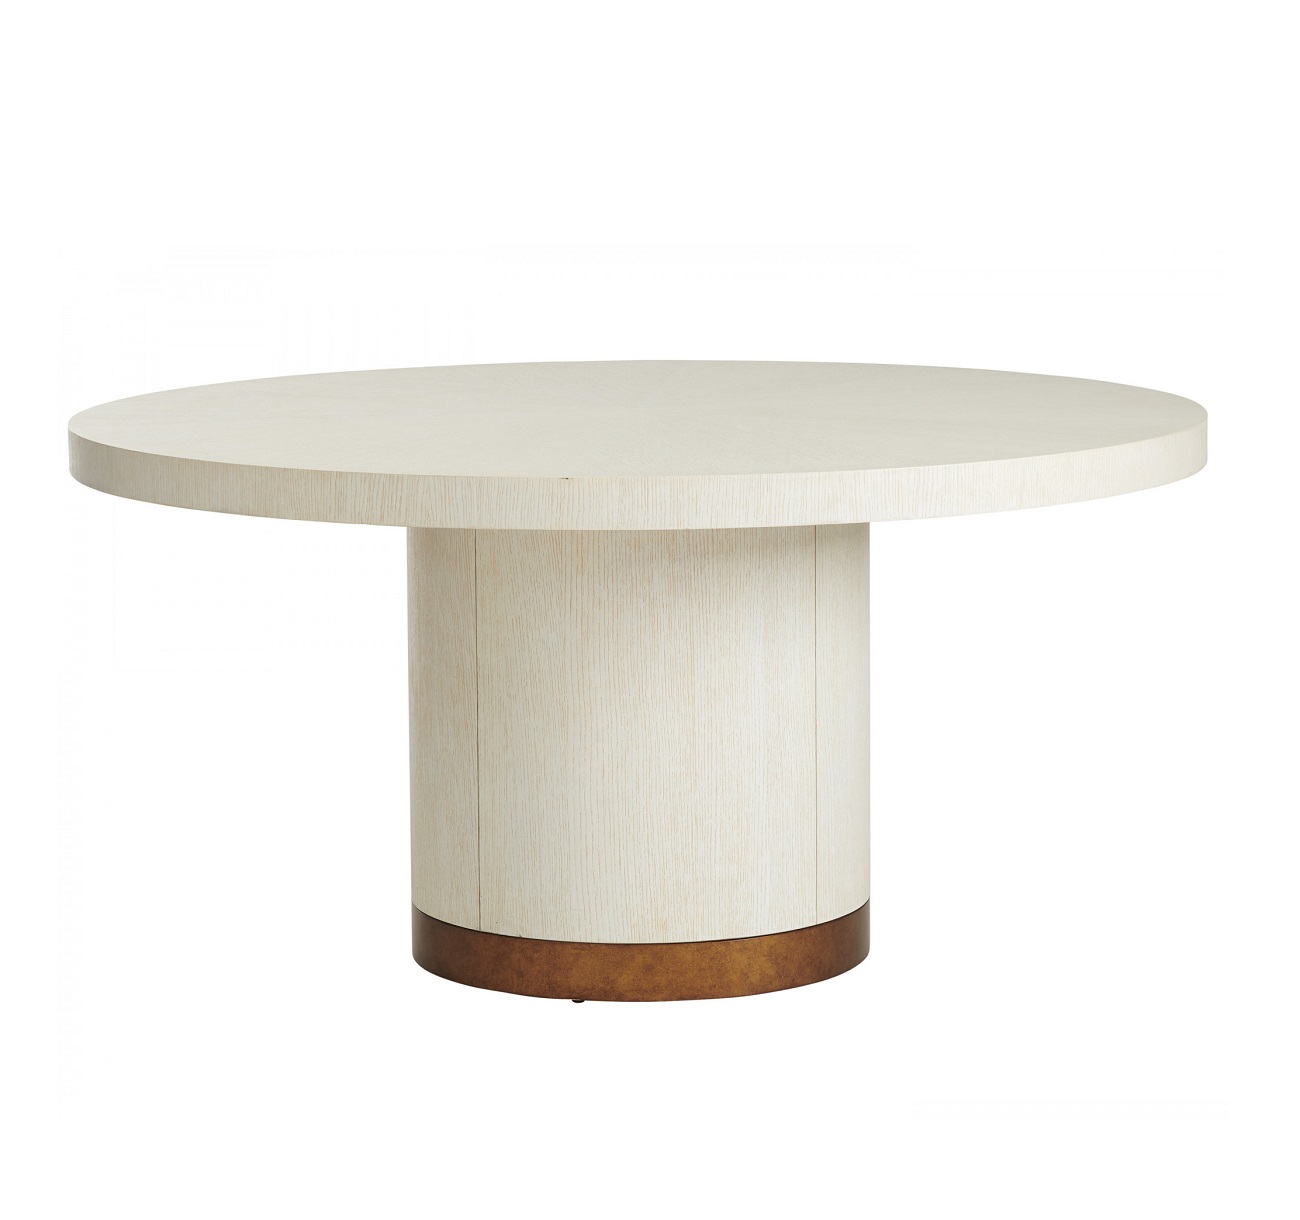 Selfridge Round Dining Table, Lexington Round Dining Tables For Sale, Brooklyn, New York